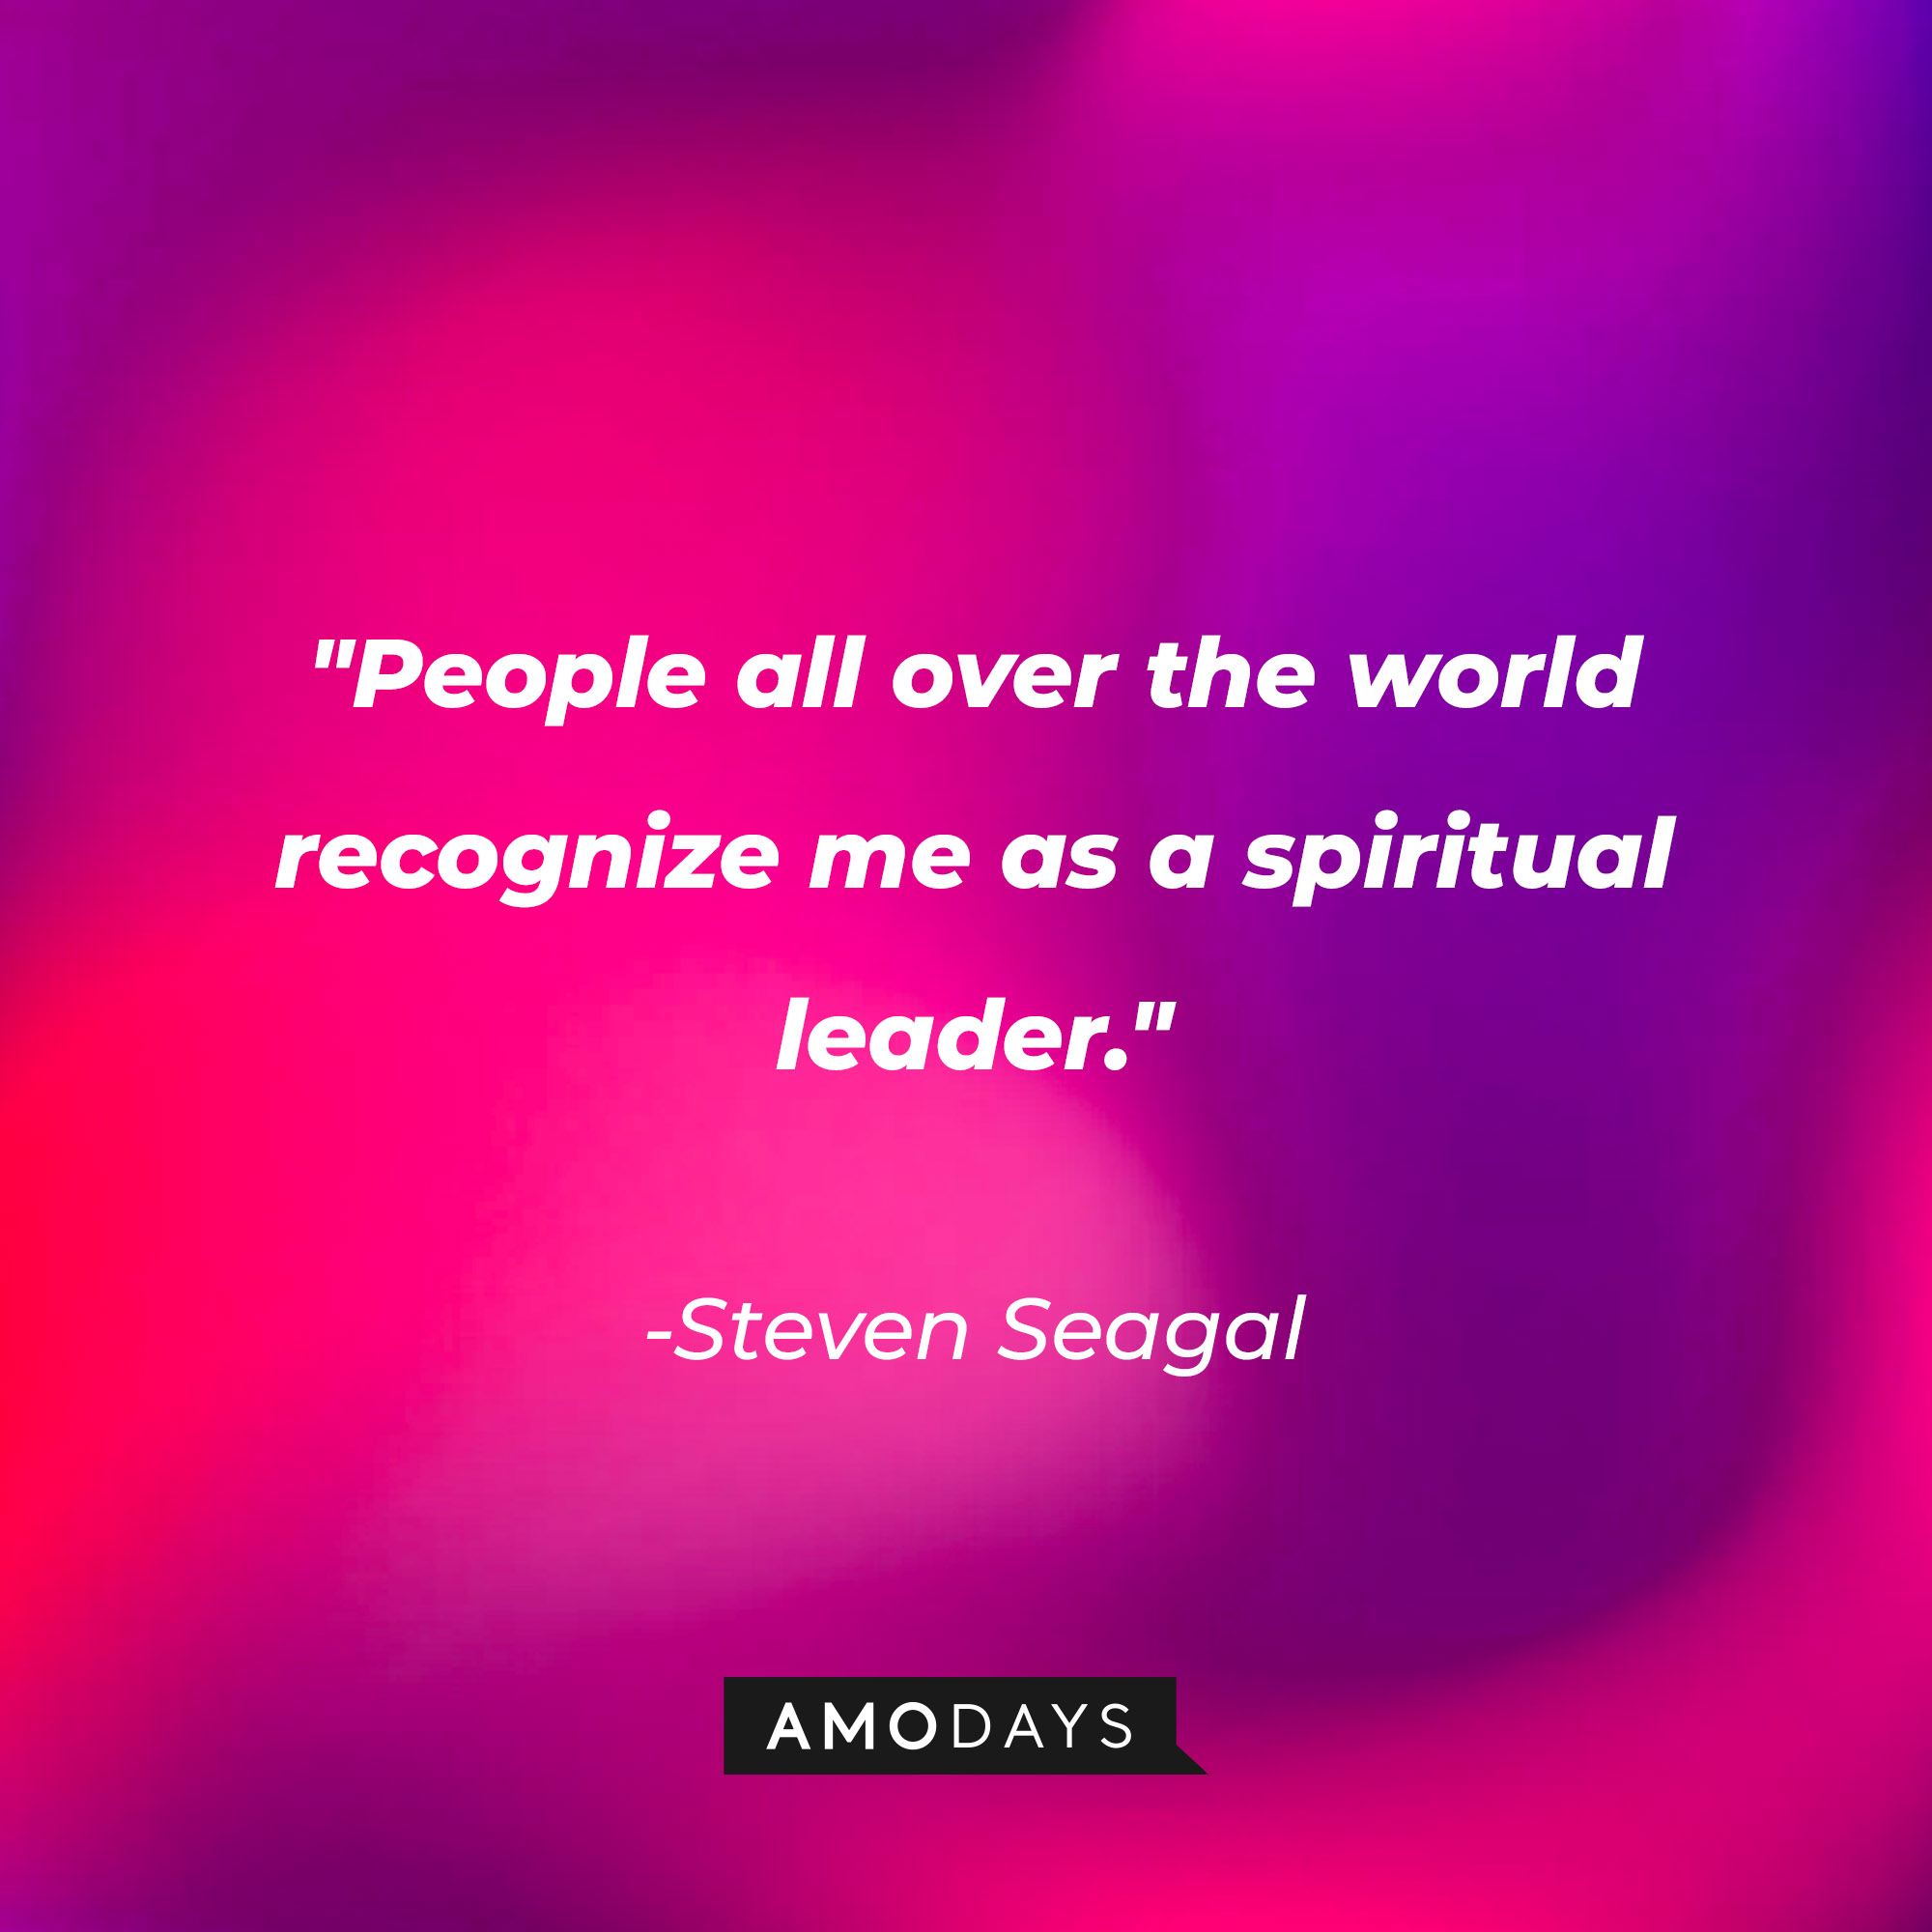 Steven Seagal’s quote: "People all over the world recognize me as a spiritual leader." | Image: AmoDays